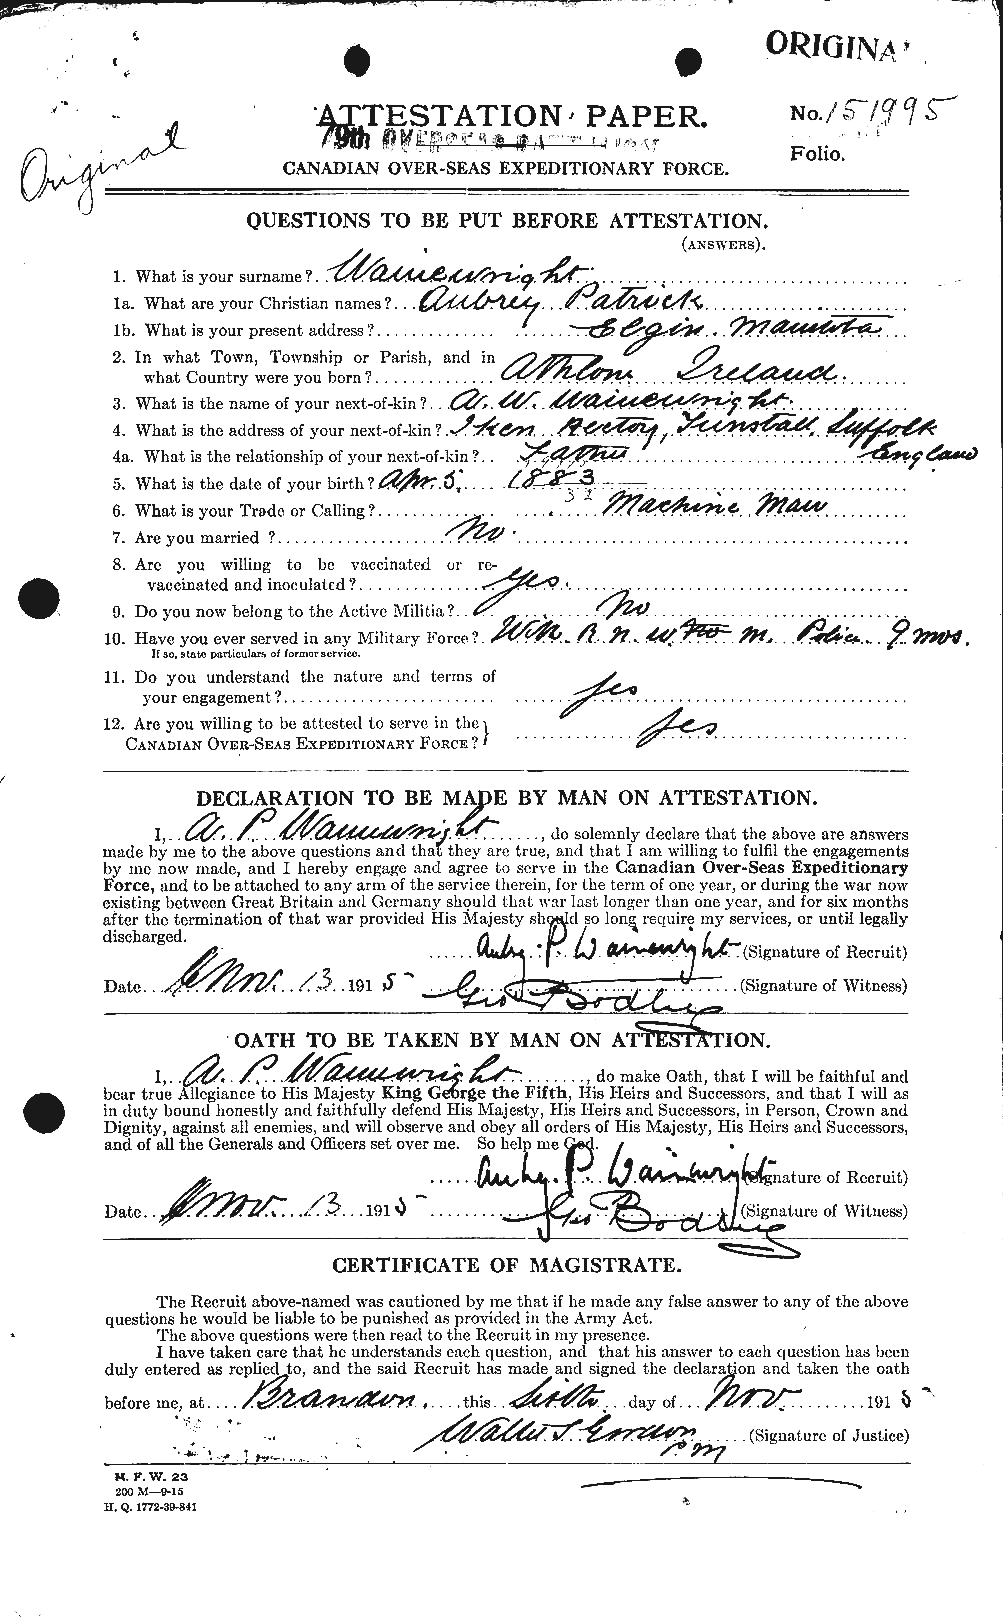 Personnel Records of the First World War - CEF 654114a